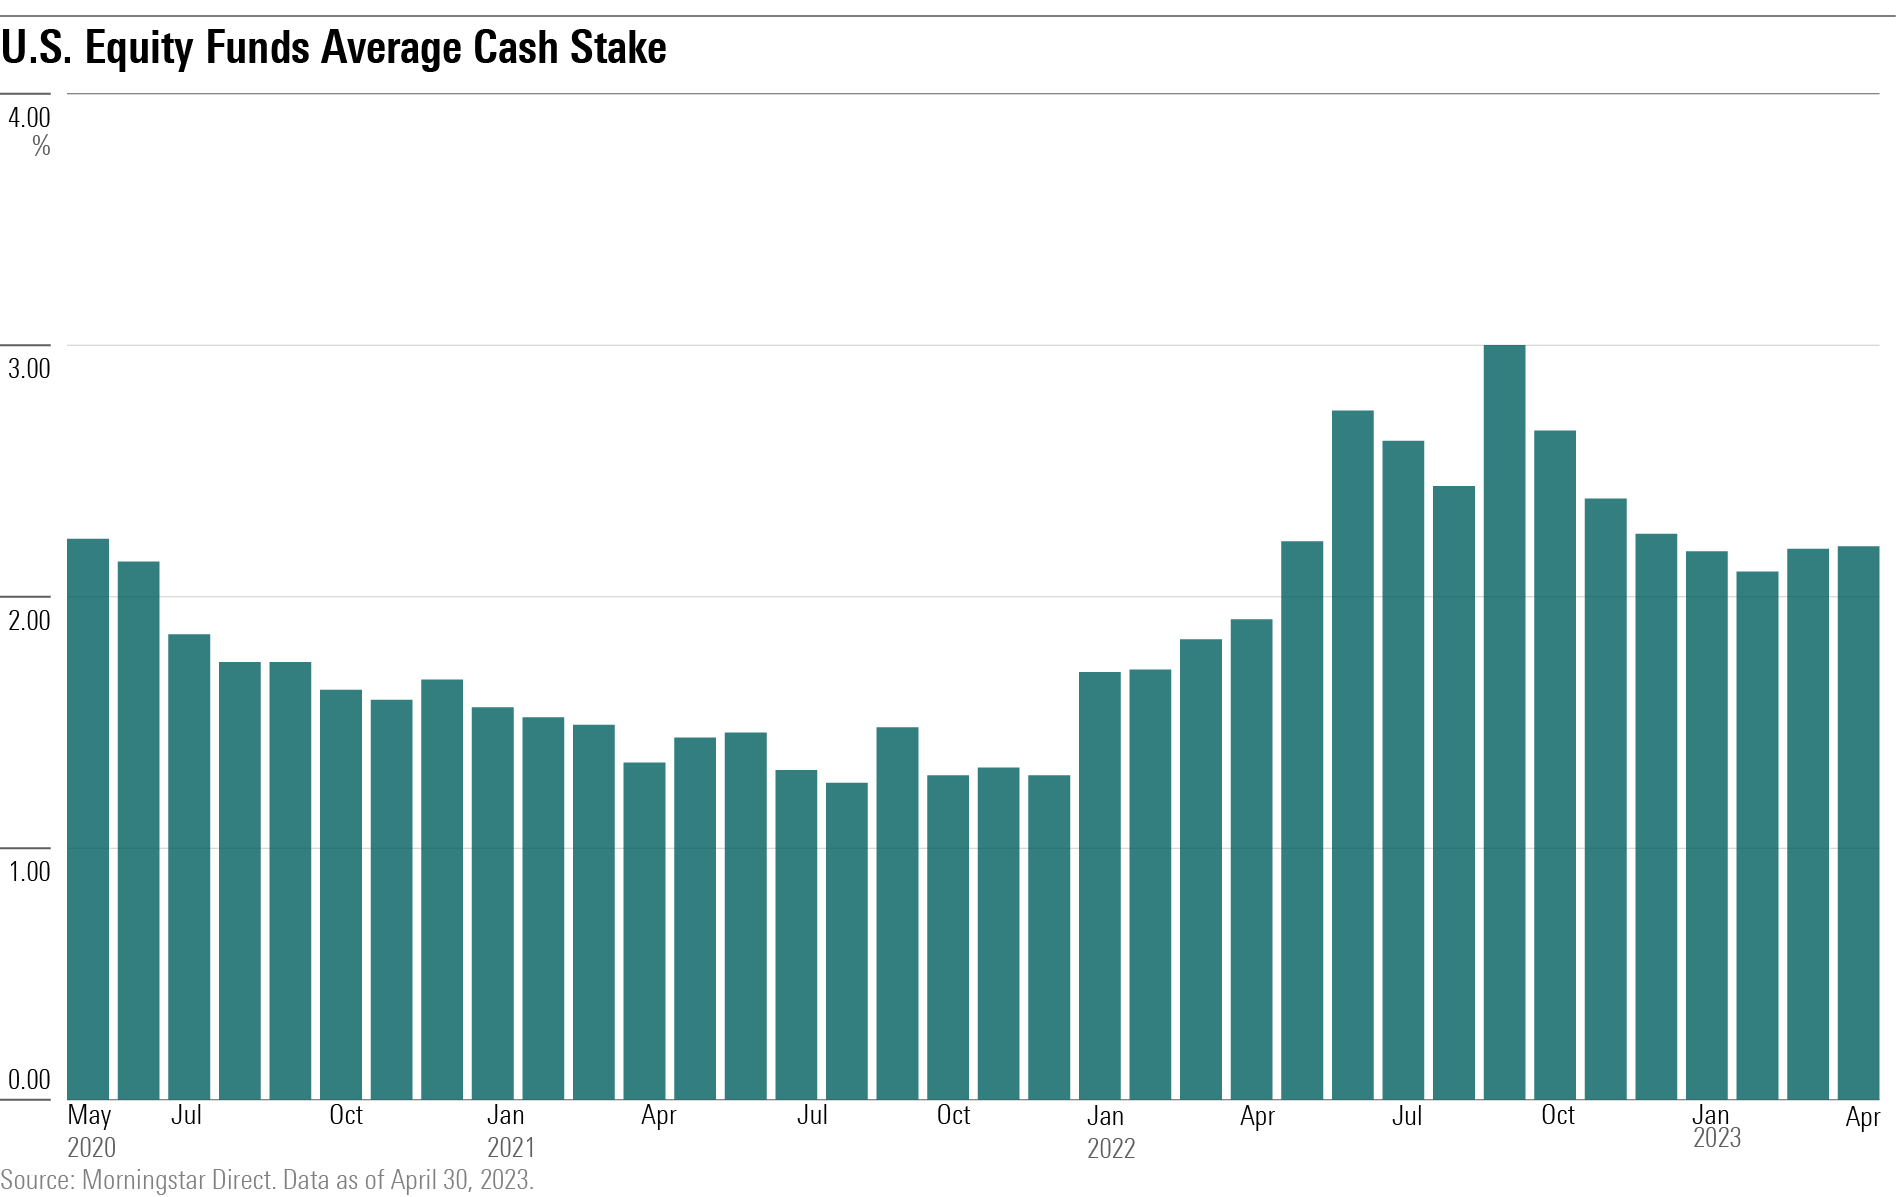 bar chart showing the average cash stake of U.S. equity mutual funds and ETFs